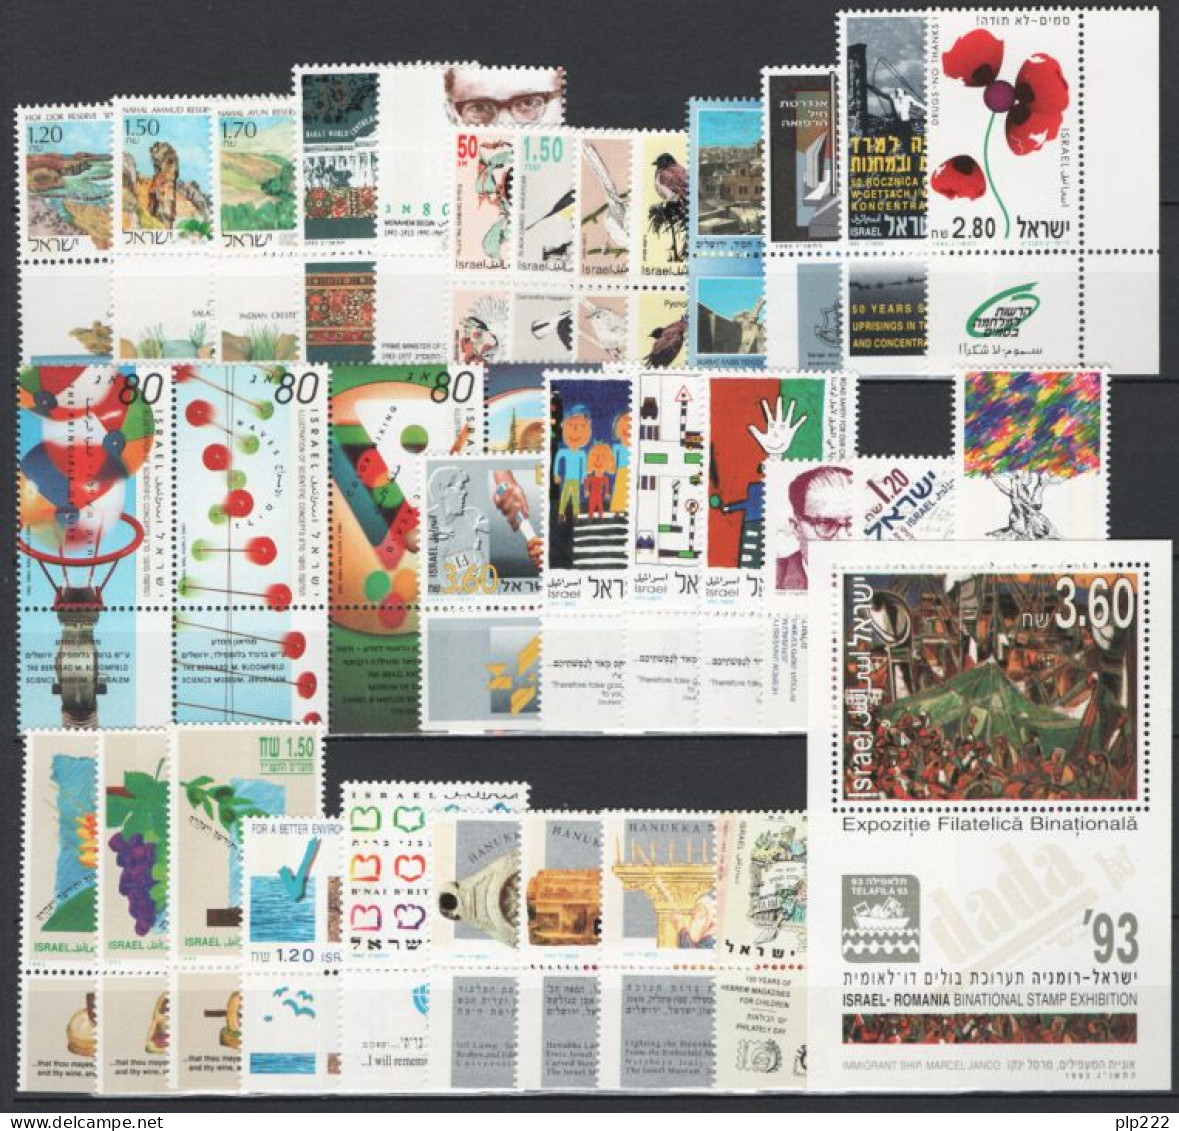 Israele 1993 Annata Completa Con Appendice / Complete Year Set With Tab **/MNH VF - Annate Complete